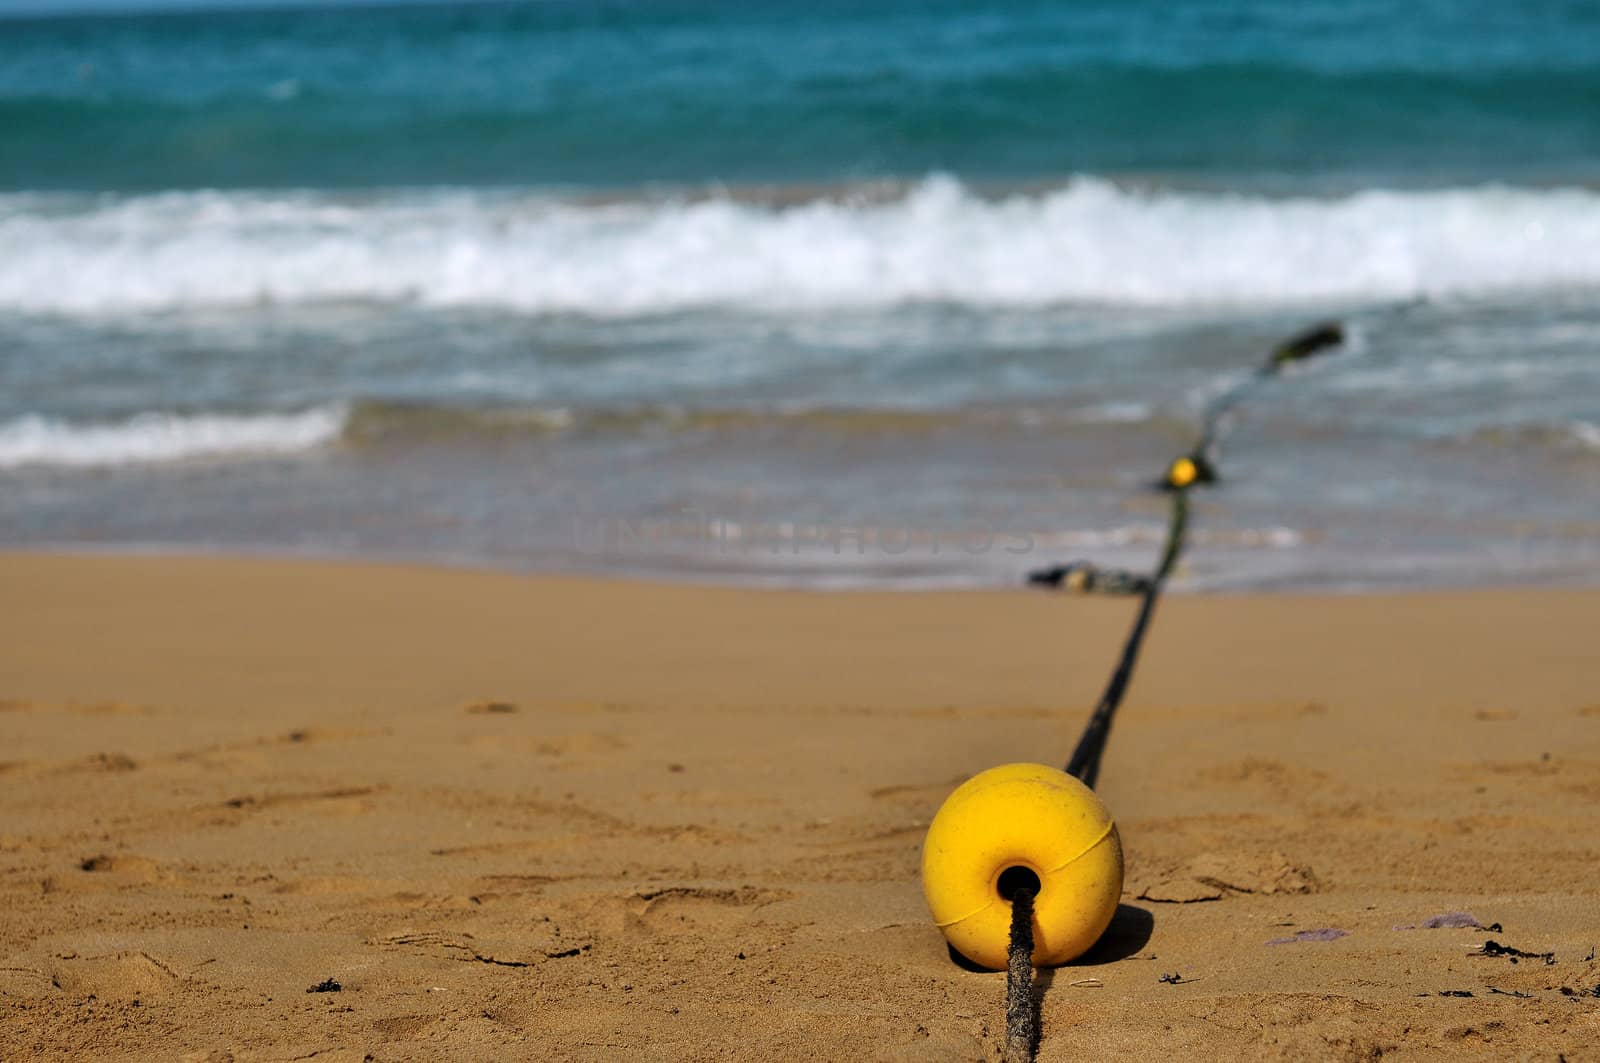 
Yellow float put on rope lies on the sand by the sea